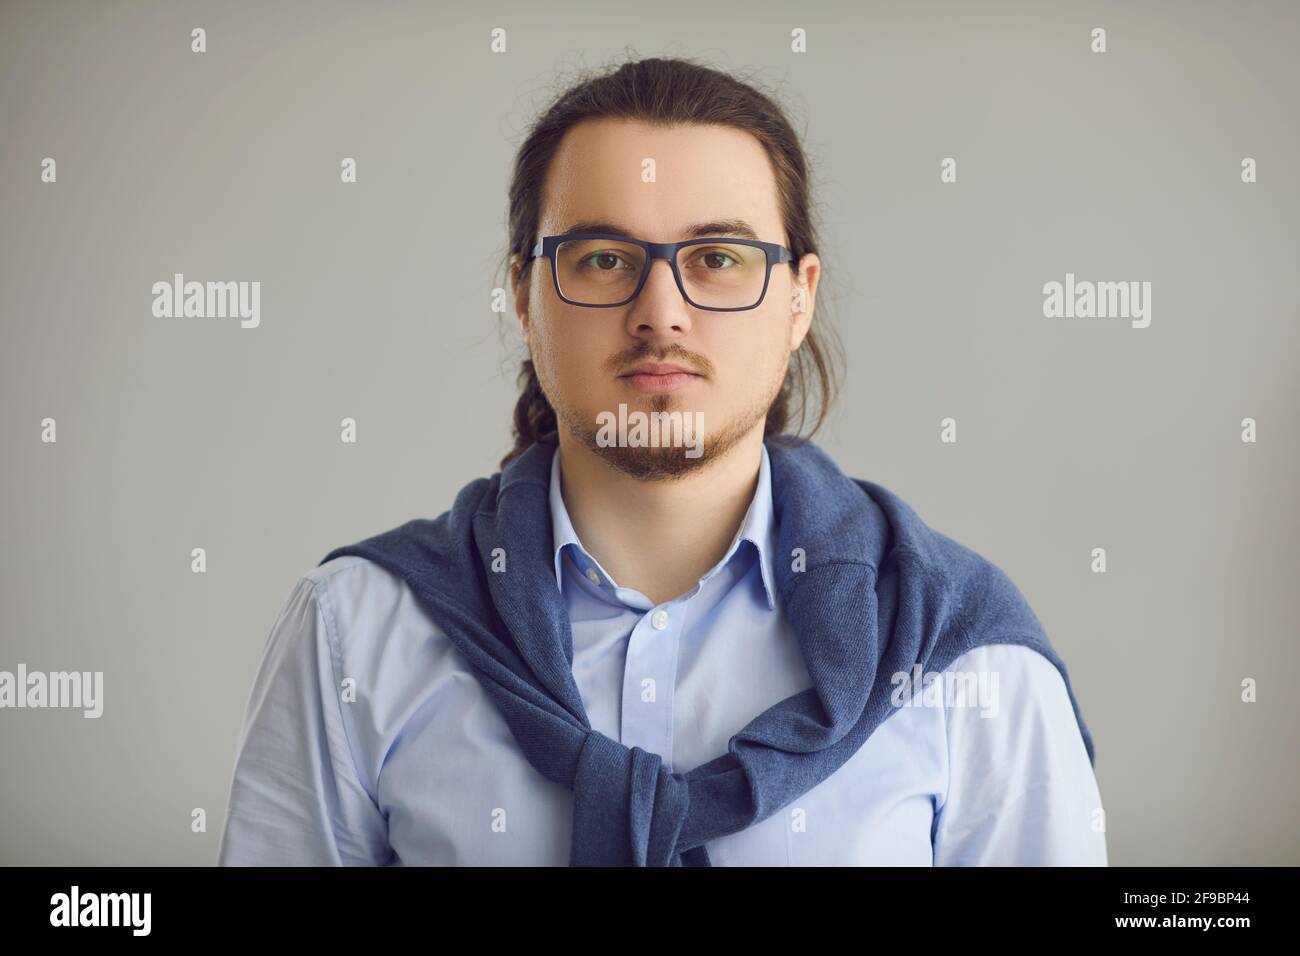 Studio headshot portrait of serious intelligent young man in office shirt and glasses Stock Photo